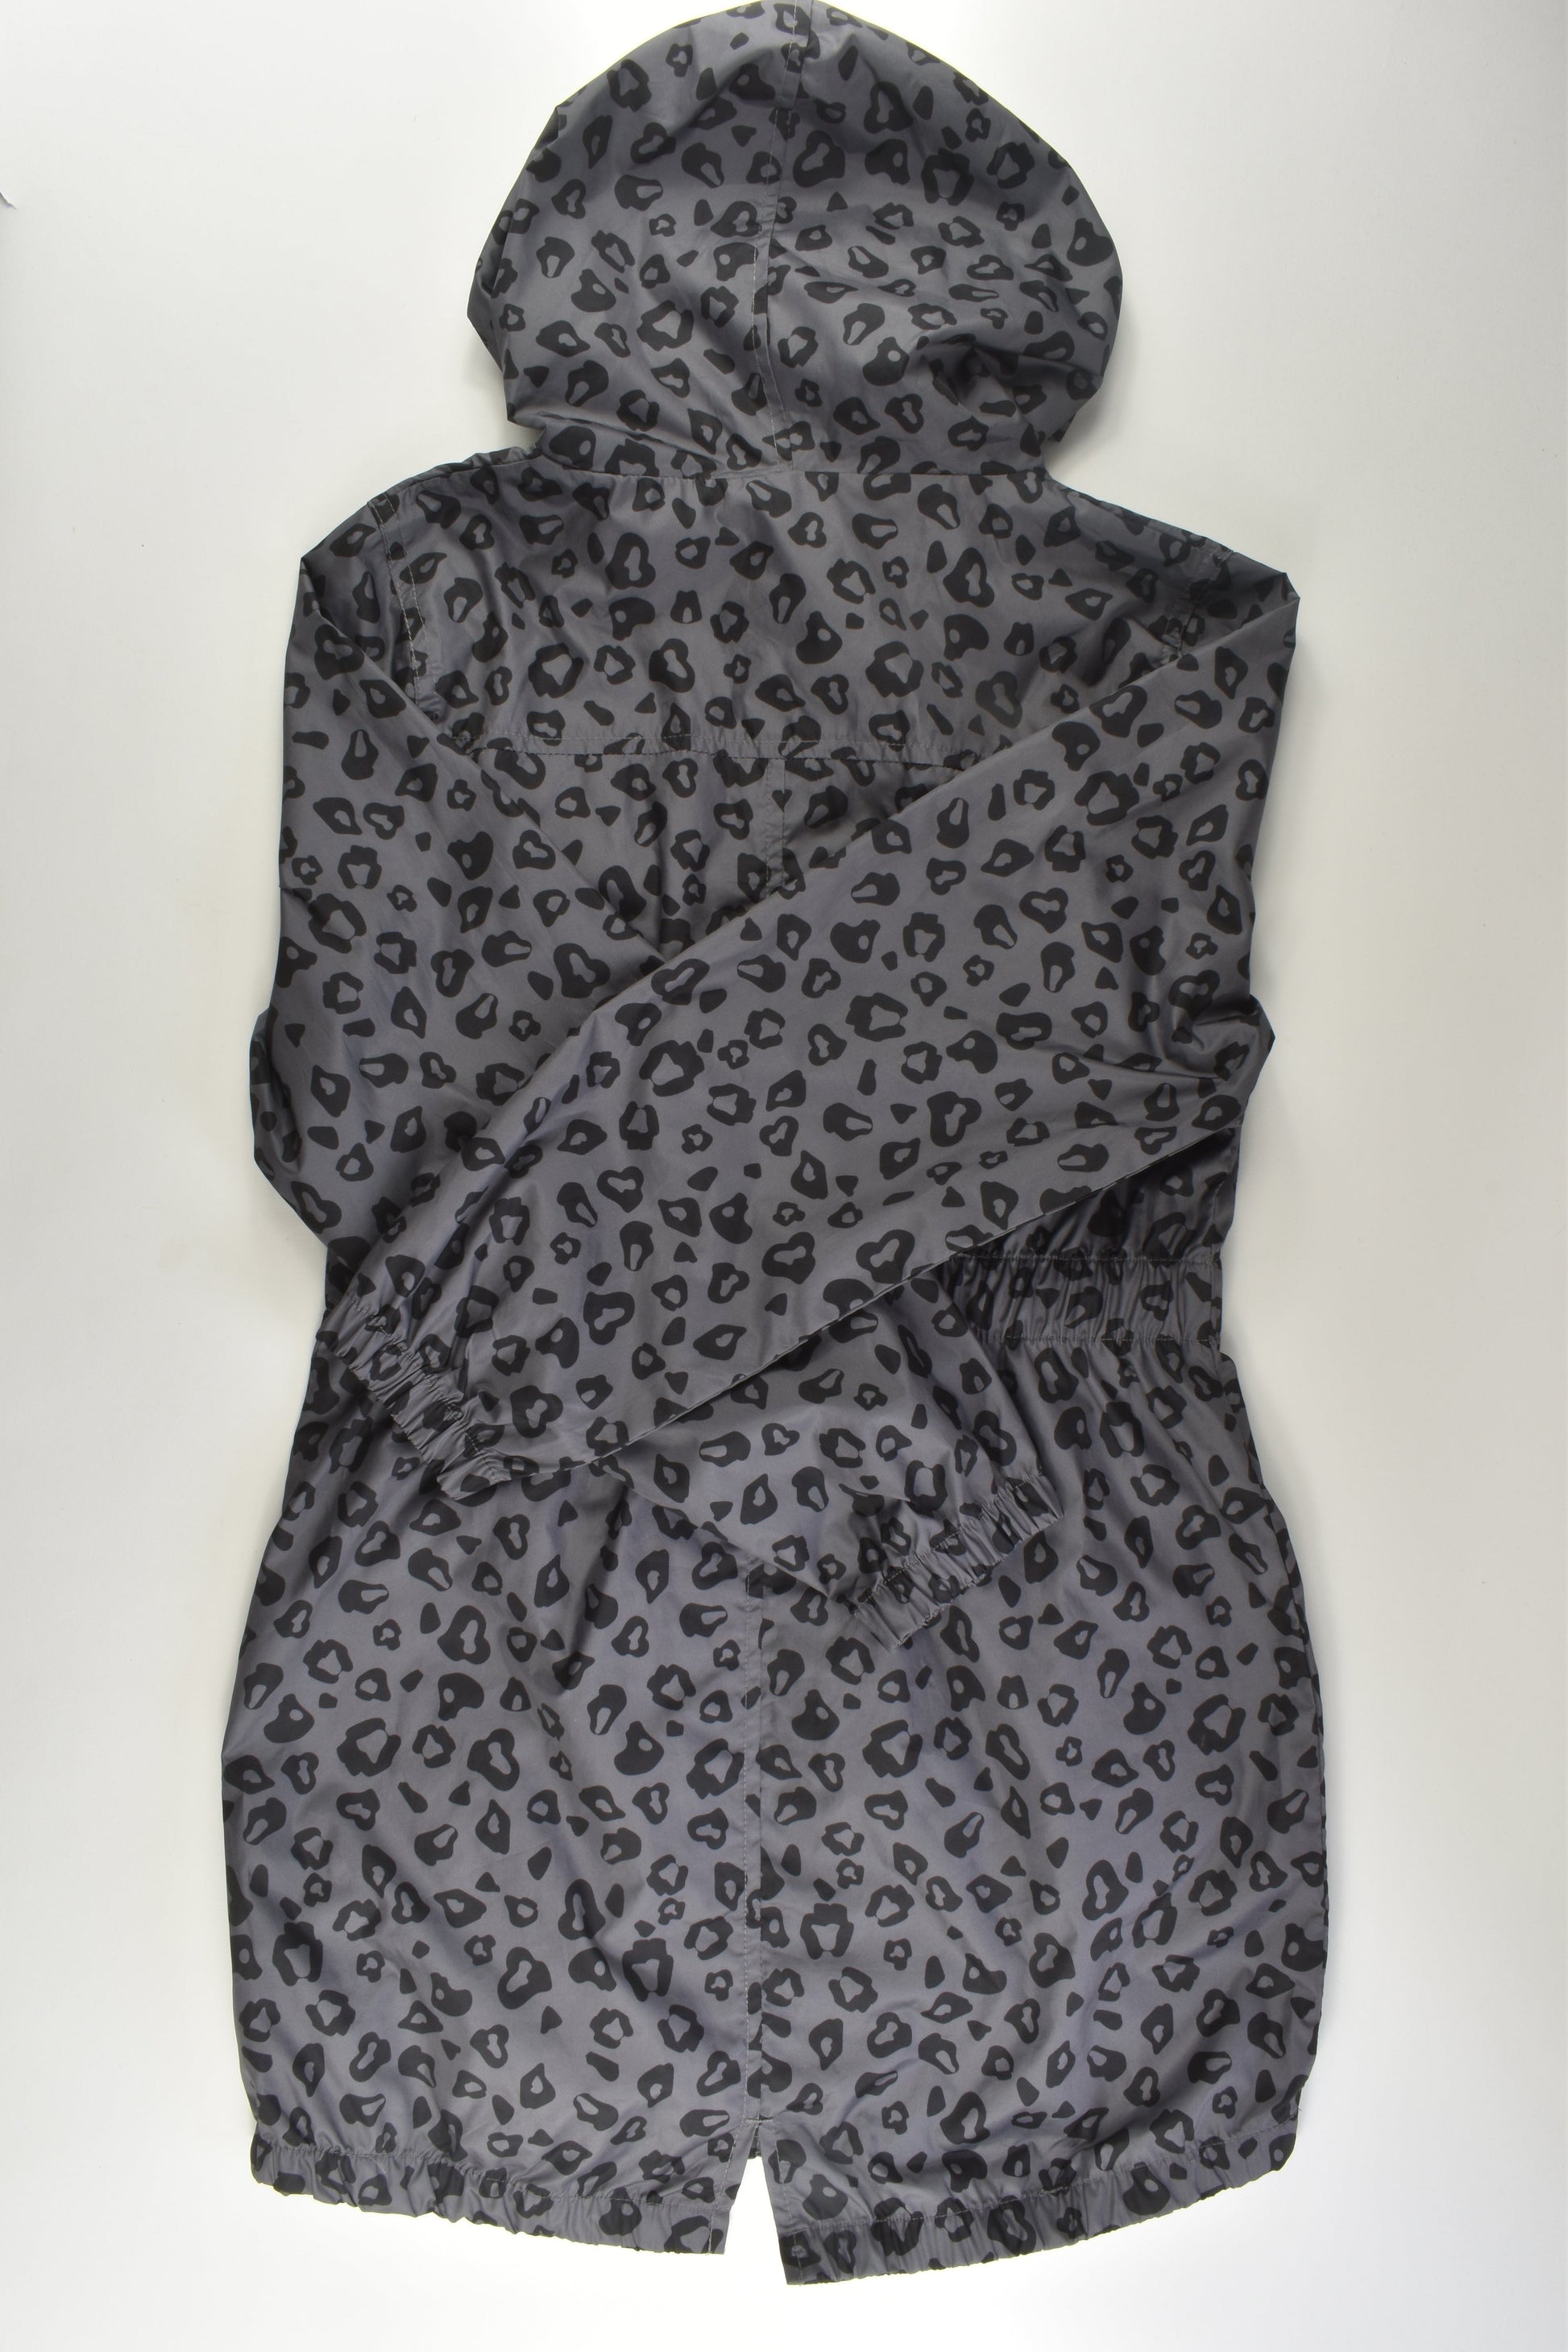 Clothing & Co Size 12 Leopard Print